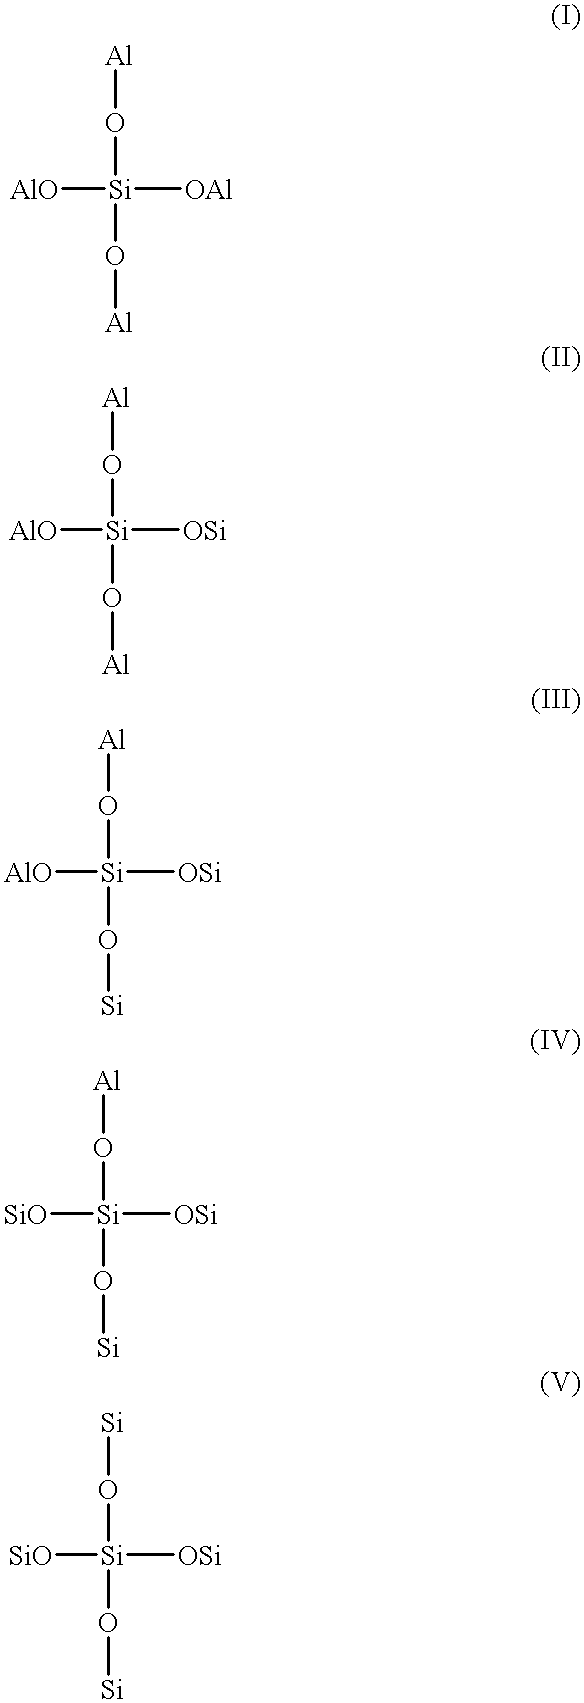 Hydrotreating catalyst and processes for hydrotreating hydrocarbon oil with the same